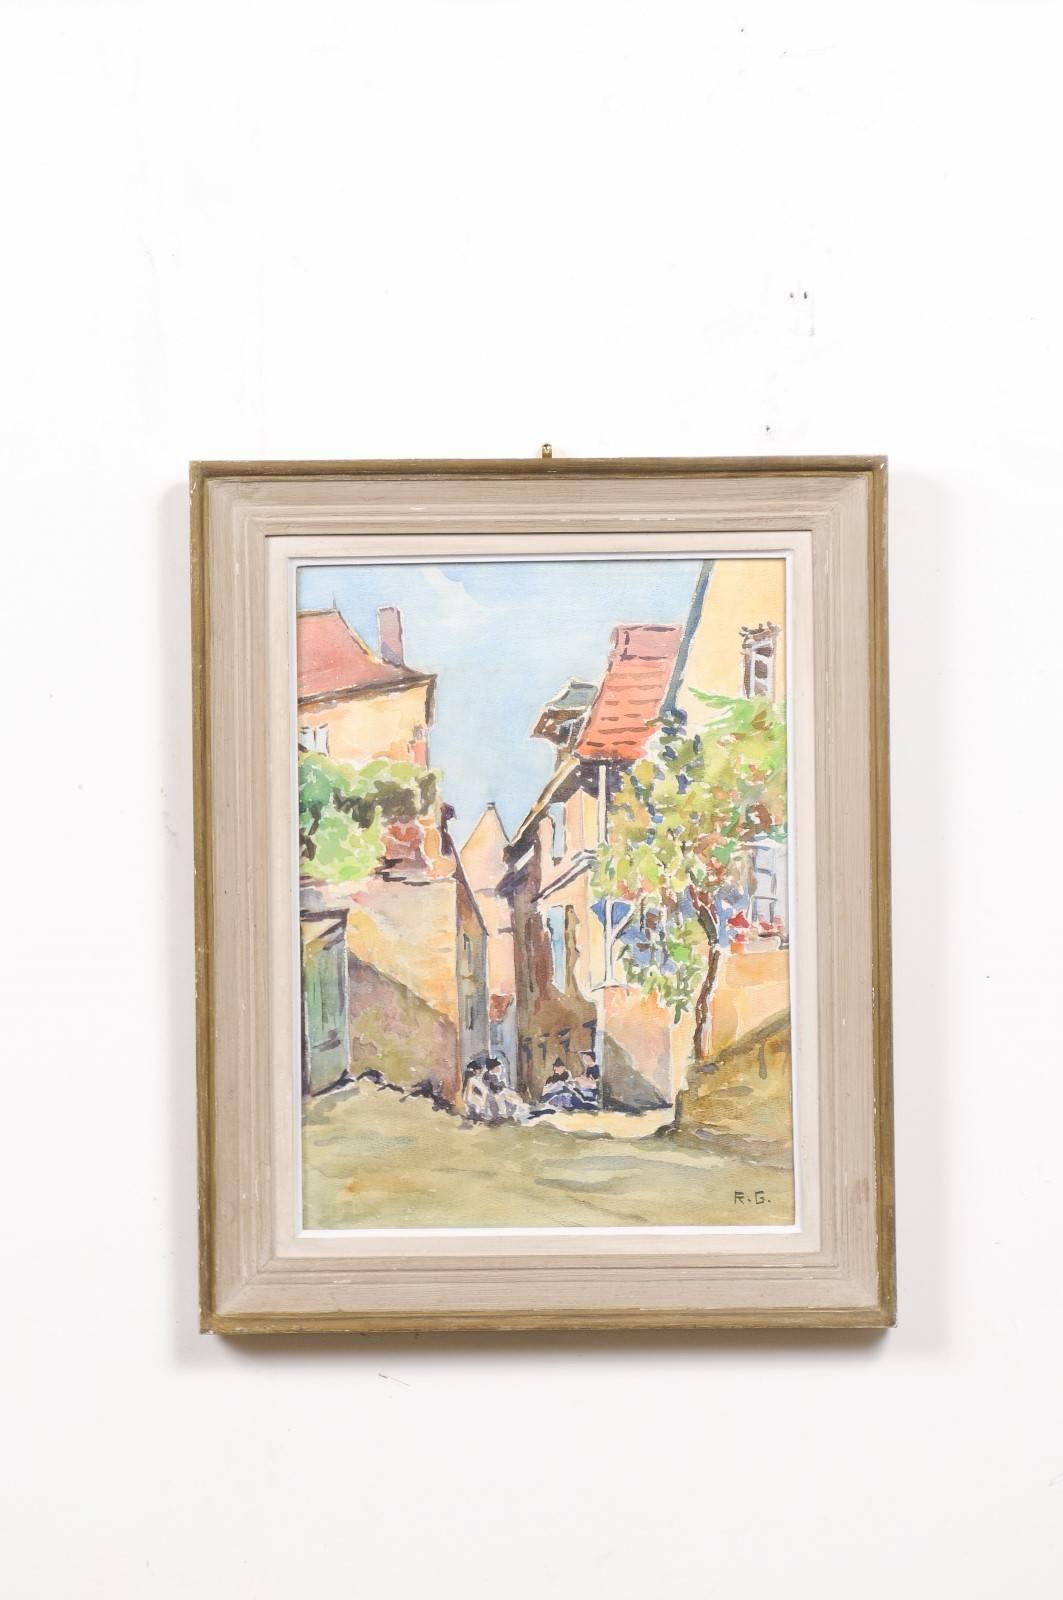 A French framed watercolor from the 19th century depicting a village scene with women in traditional costumes, signed R.G. Born during the politically dynamic 19th century, this framed watercolor features a lovely palette made of pastel tones. A